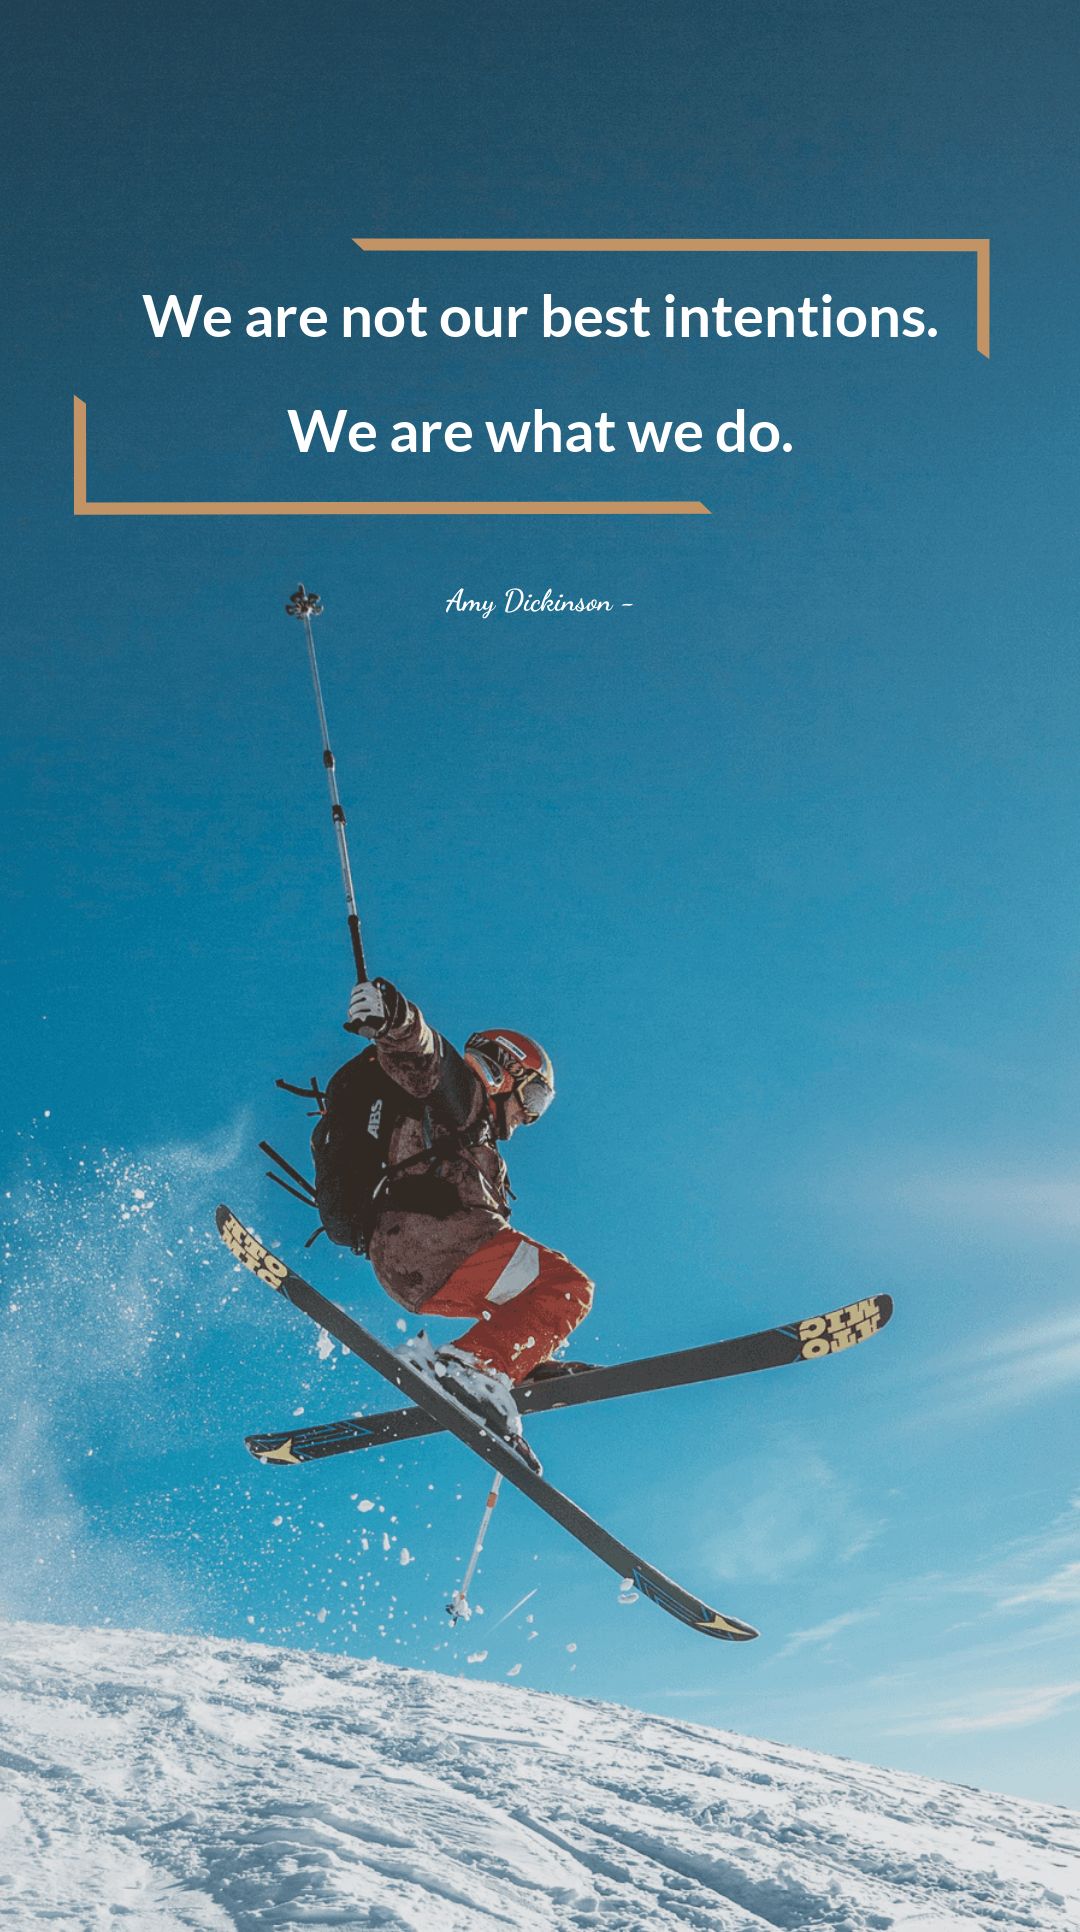 Amy Dickinson - We are not our best intentions. We are what we do. in JPG